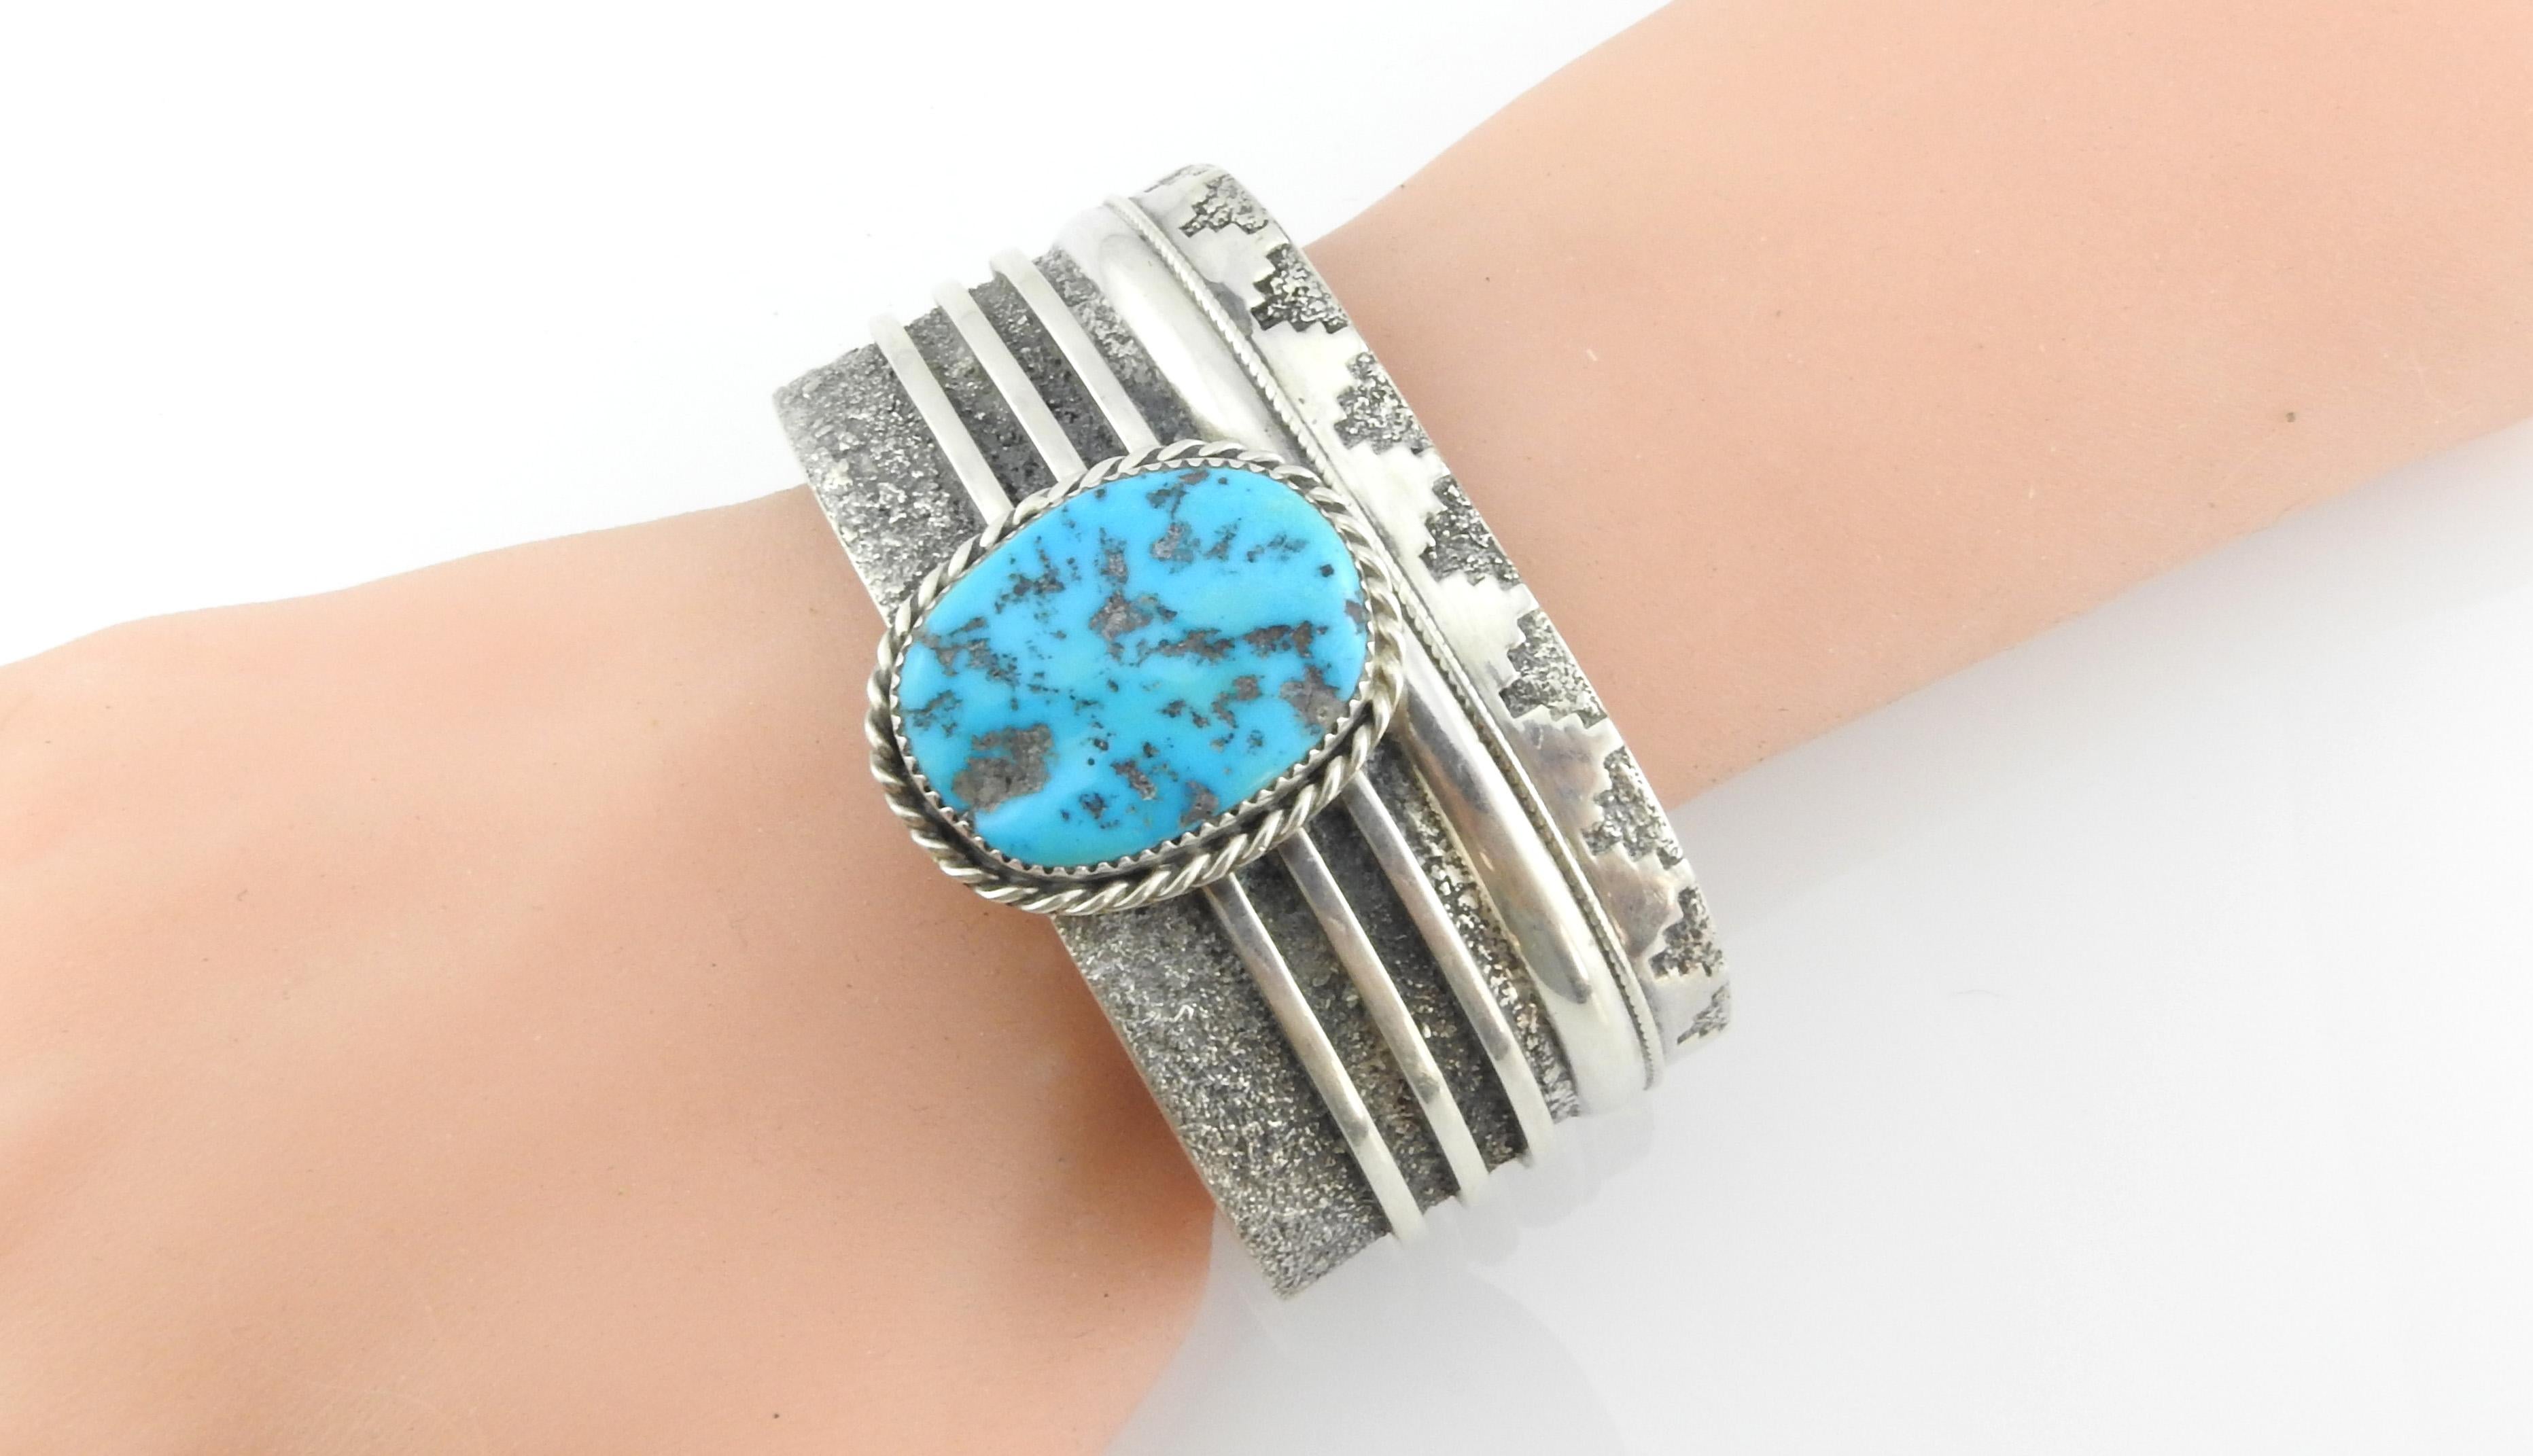 Native American Navajo L. Begay Sterling Silver Turquoise Cuff Bracelet 1